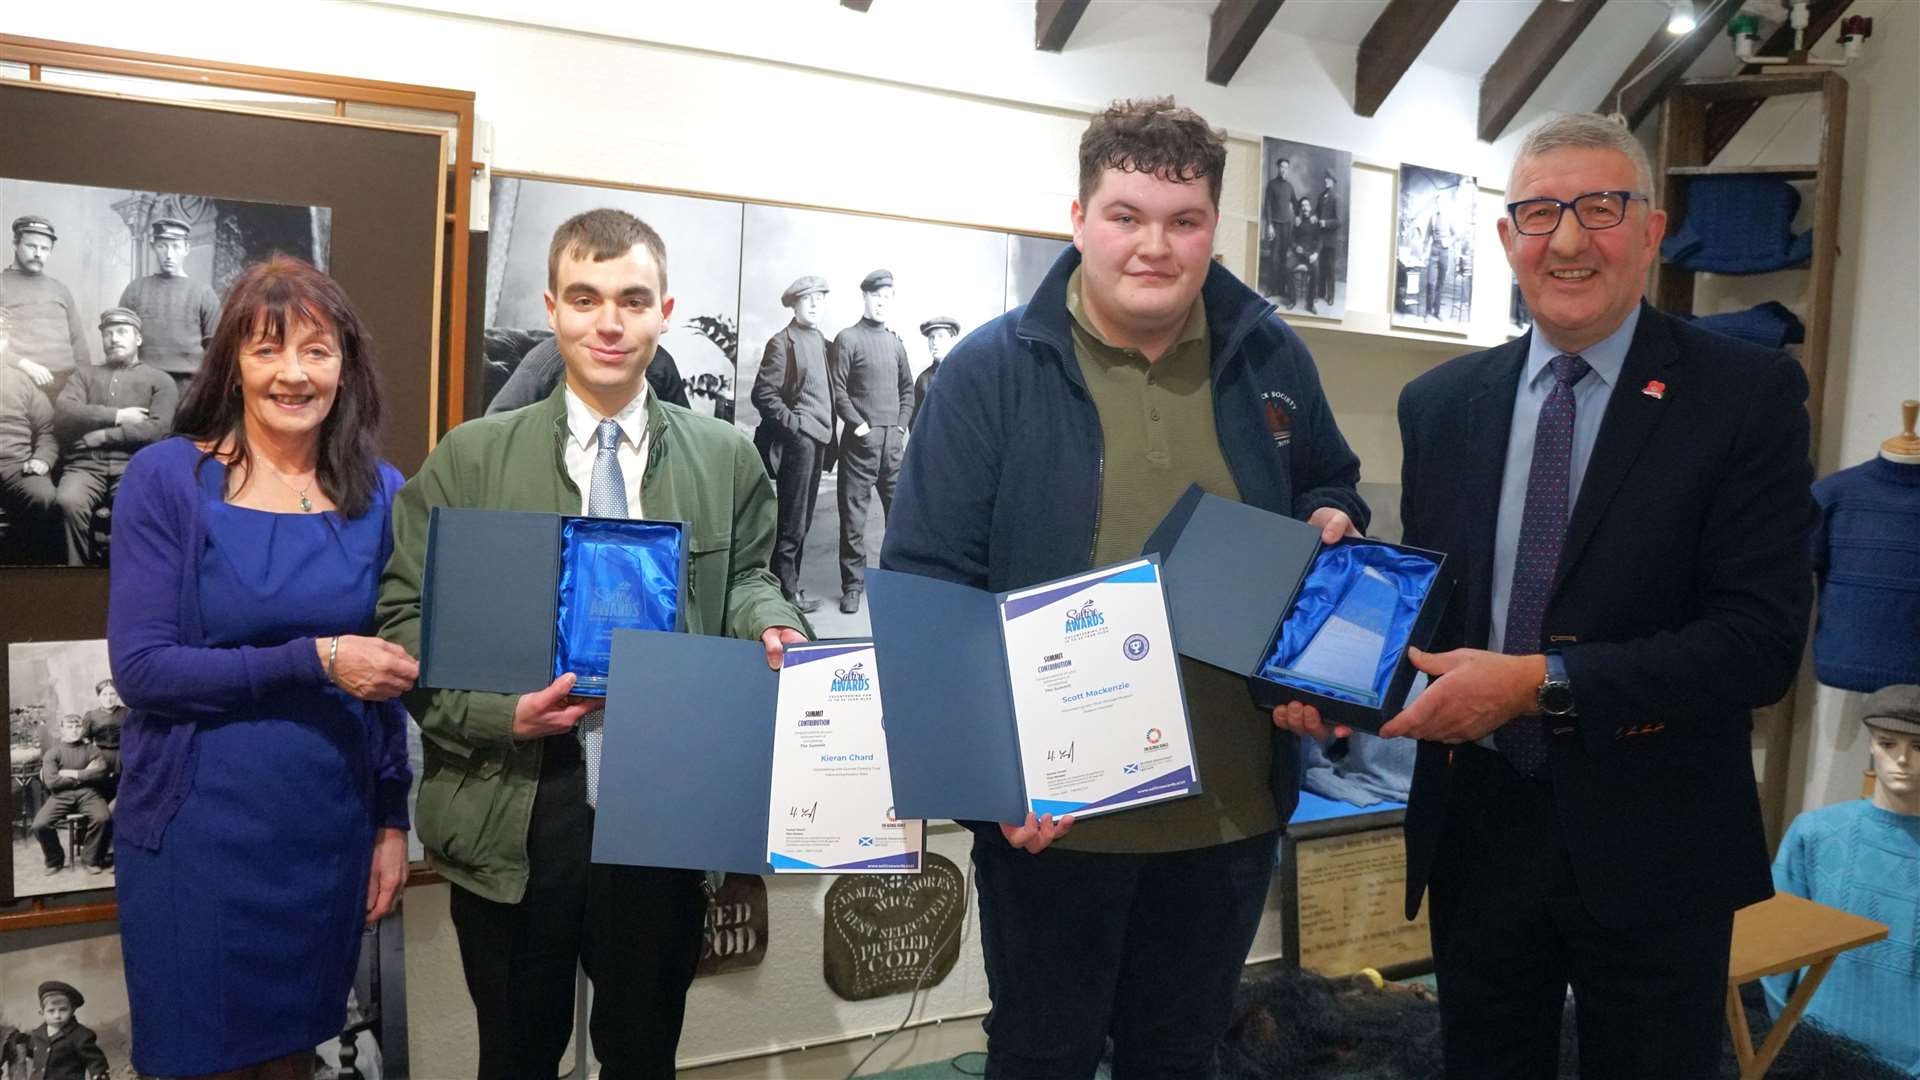 From left, Catherine Patterson from Caithness Voluntary Group, Kieran Chard and Scott Mackenzie with their awards, next to Vice Lord-Lieutenant of Caithness, Willie Watt. Picture: DGS